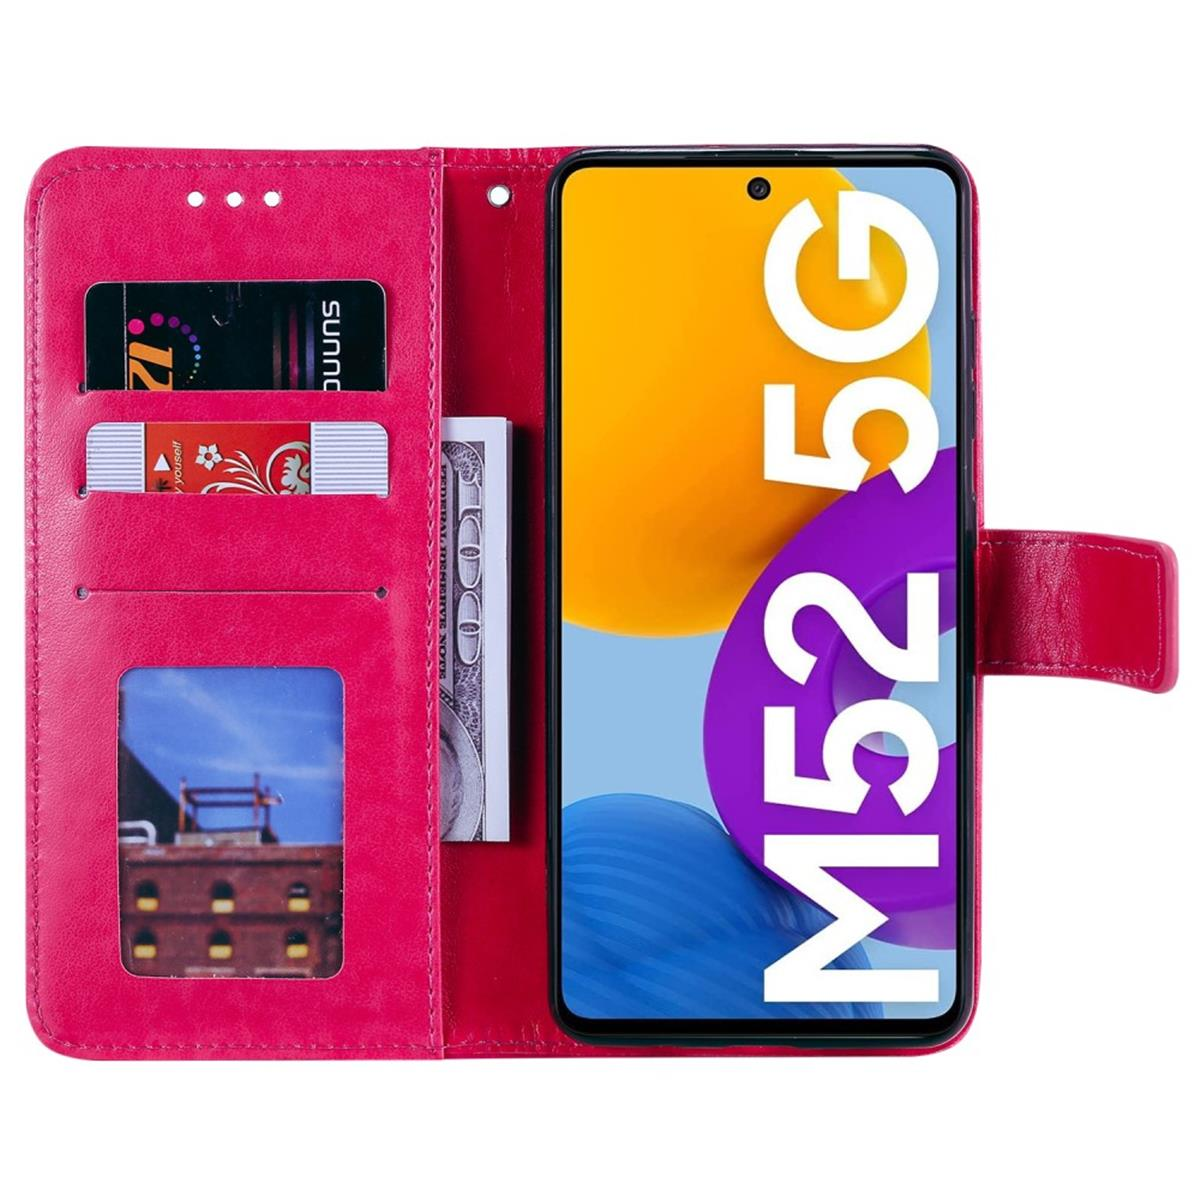 COVERKINGZ Klapphülle mit Mandala M52 Samsung, 5G, Muster, Pink Bookcover, Galaxy